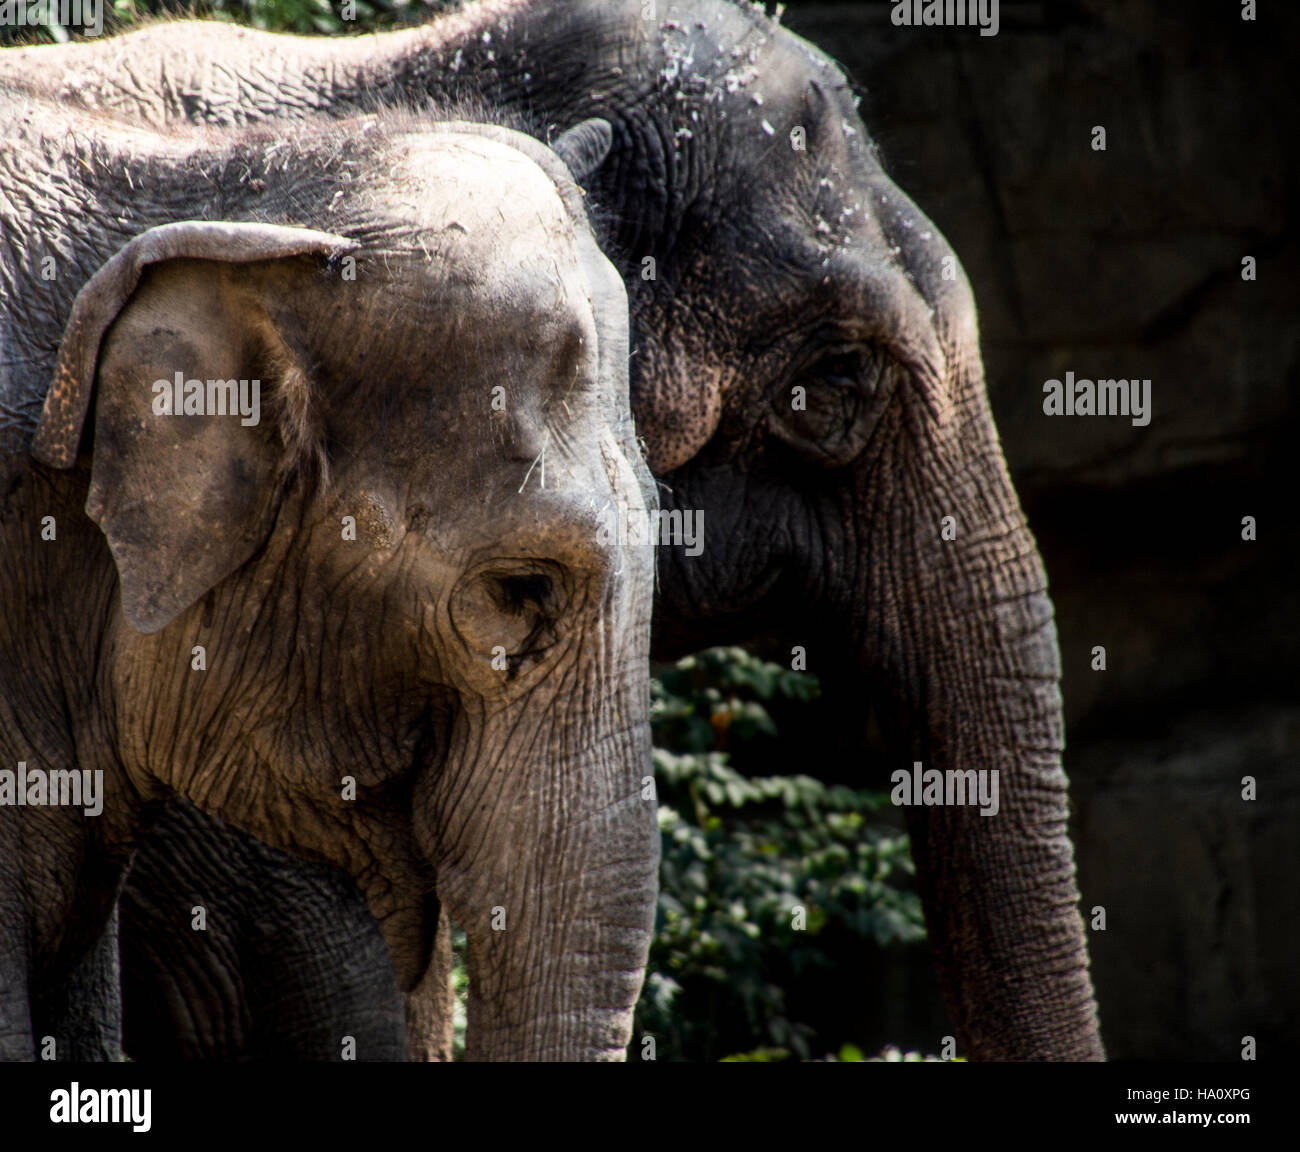 Two Asian elephants at the San Luis zoo  in Missouri Stock Photo